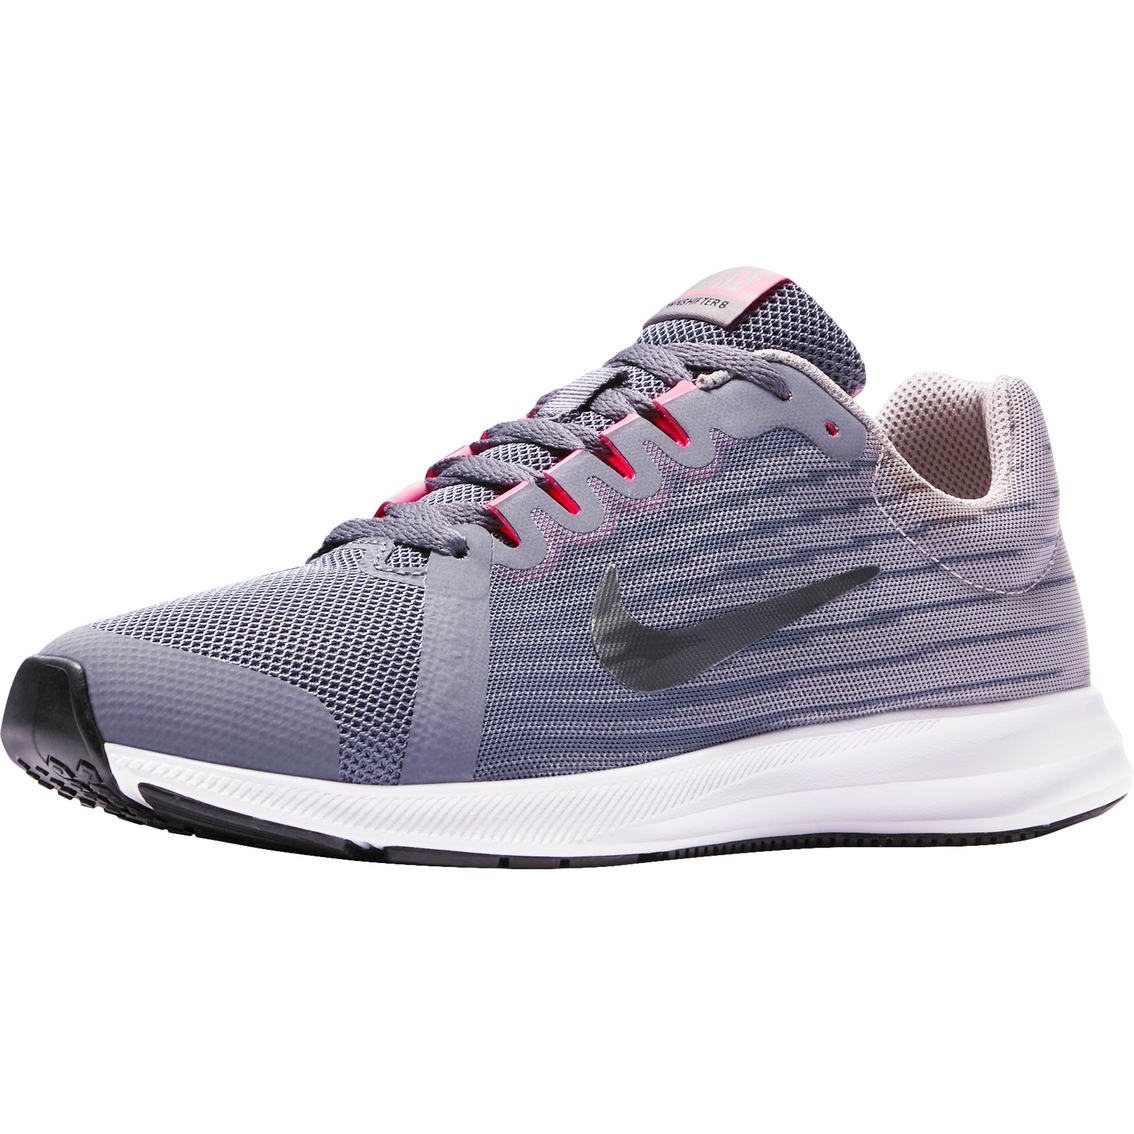 nike wmns downshifter 8